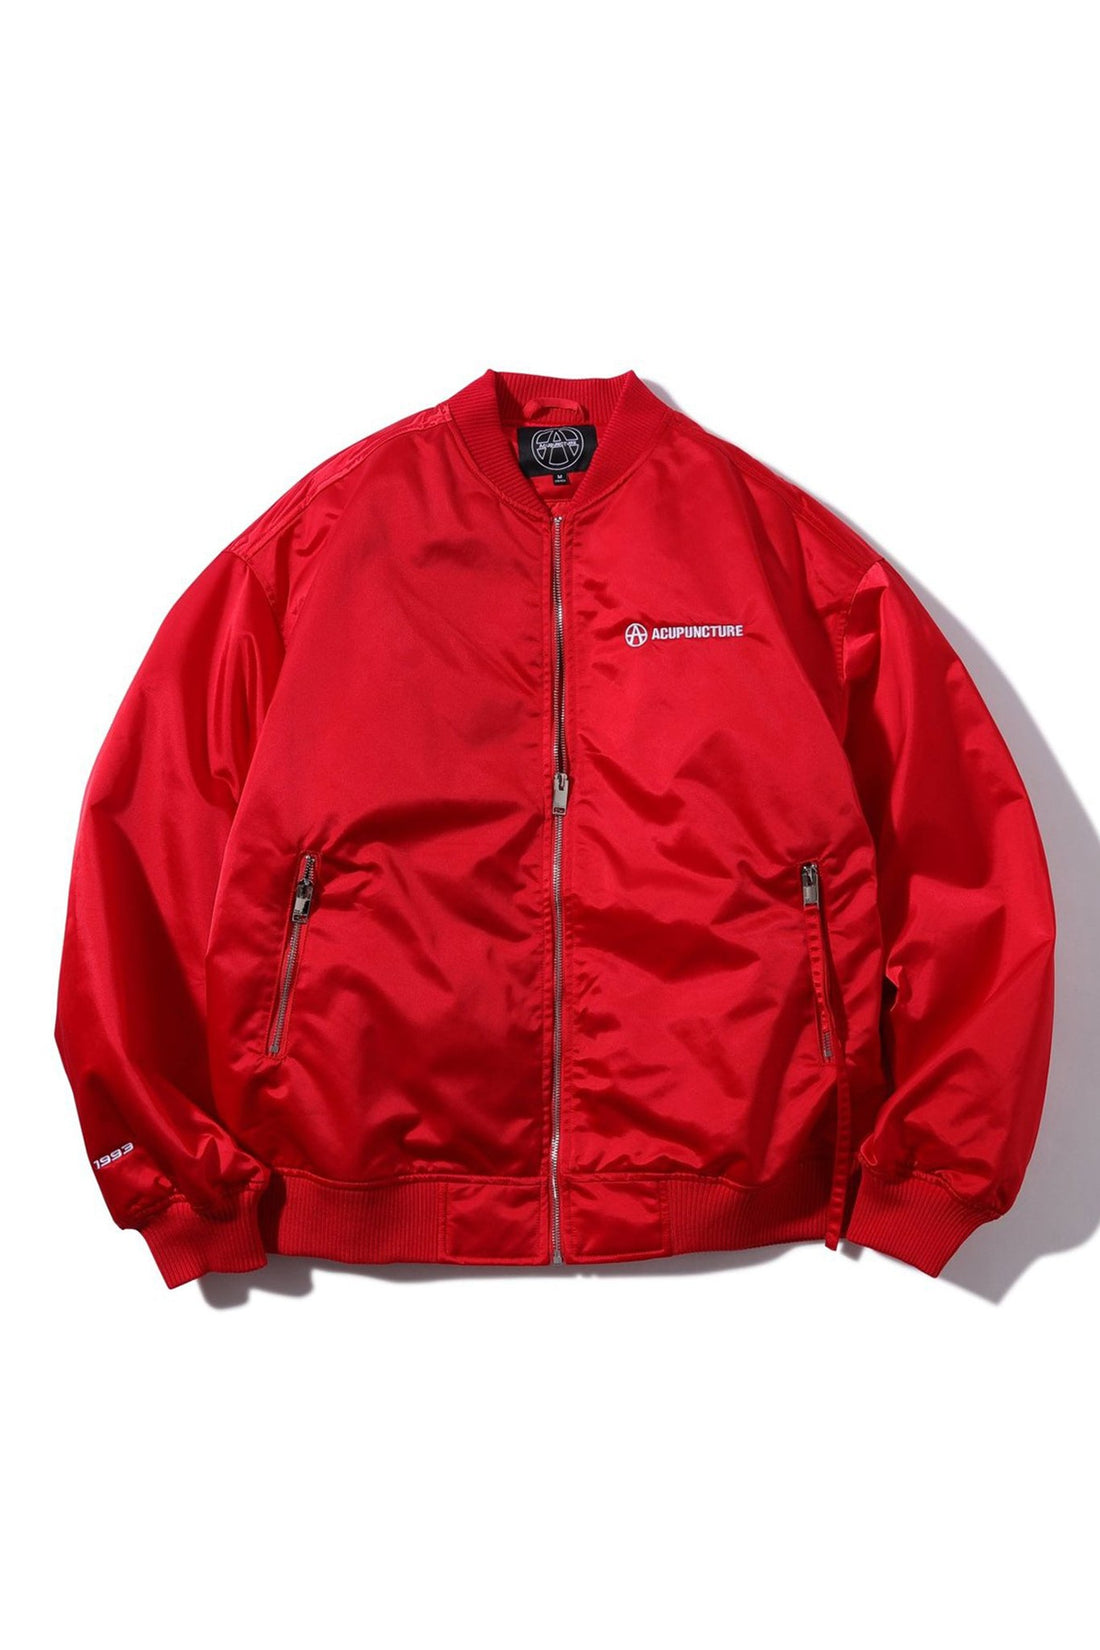 SKELETON HANDS BOMBER RED Acupuncture